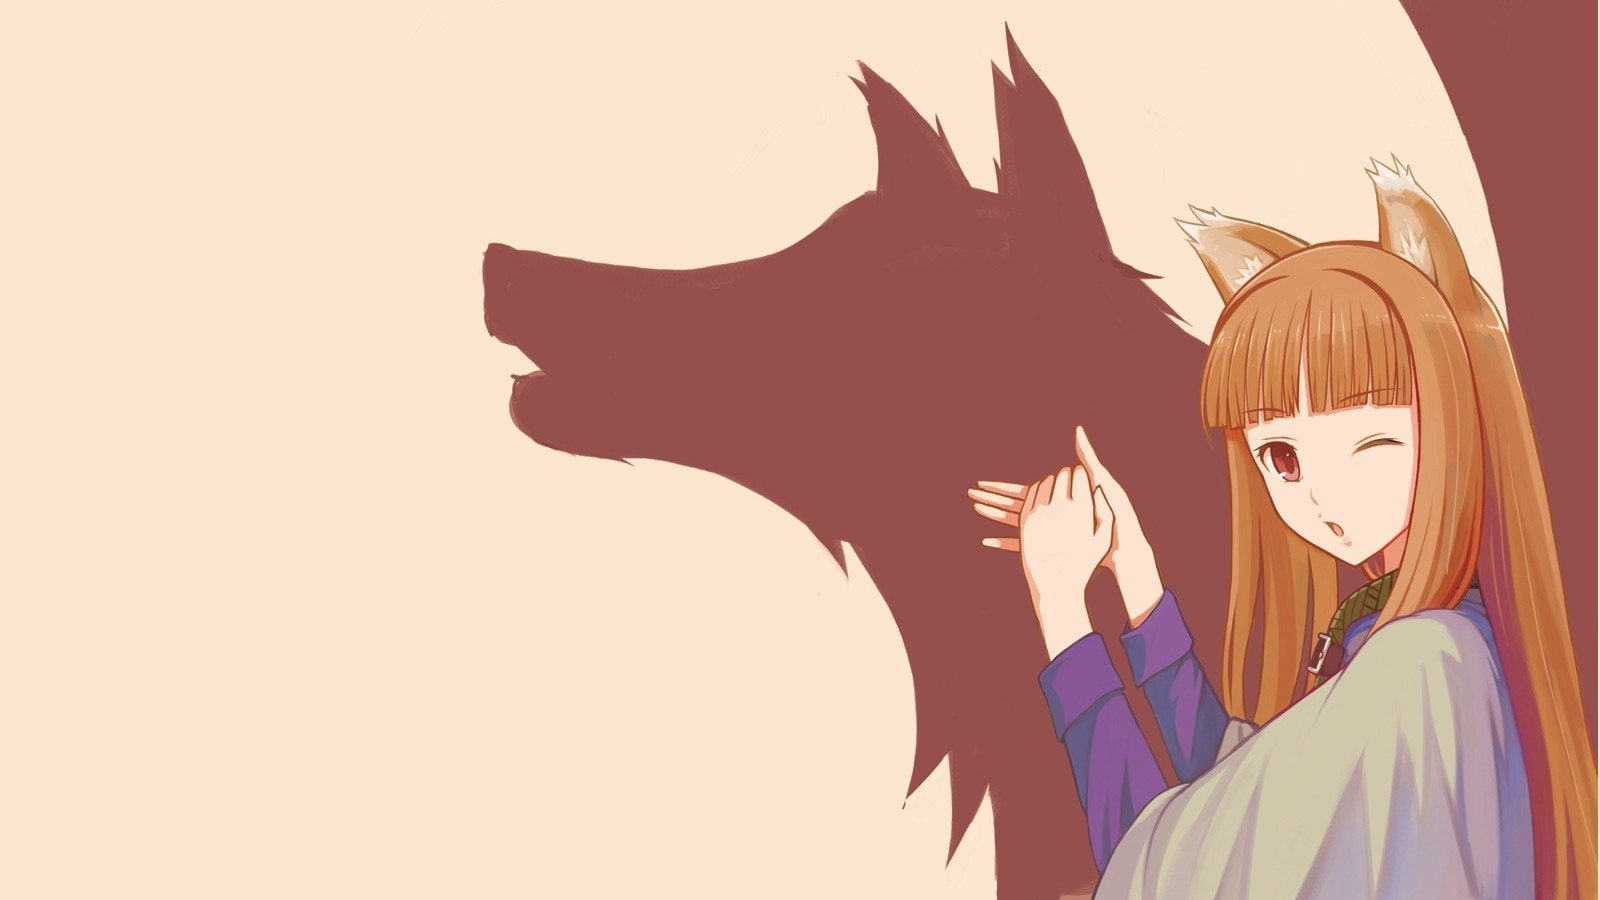 holo, spice, wise, wolf